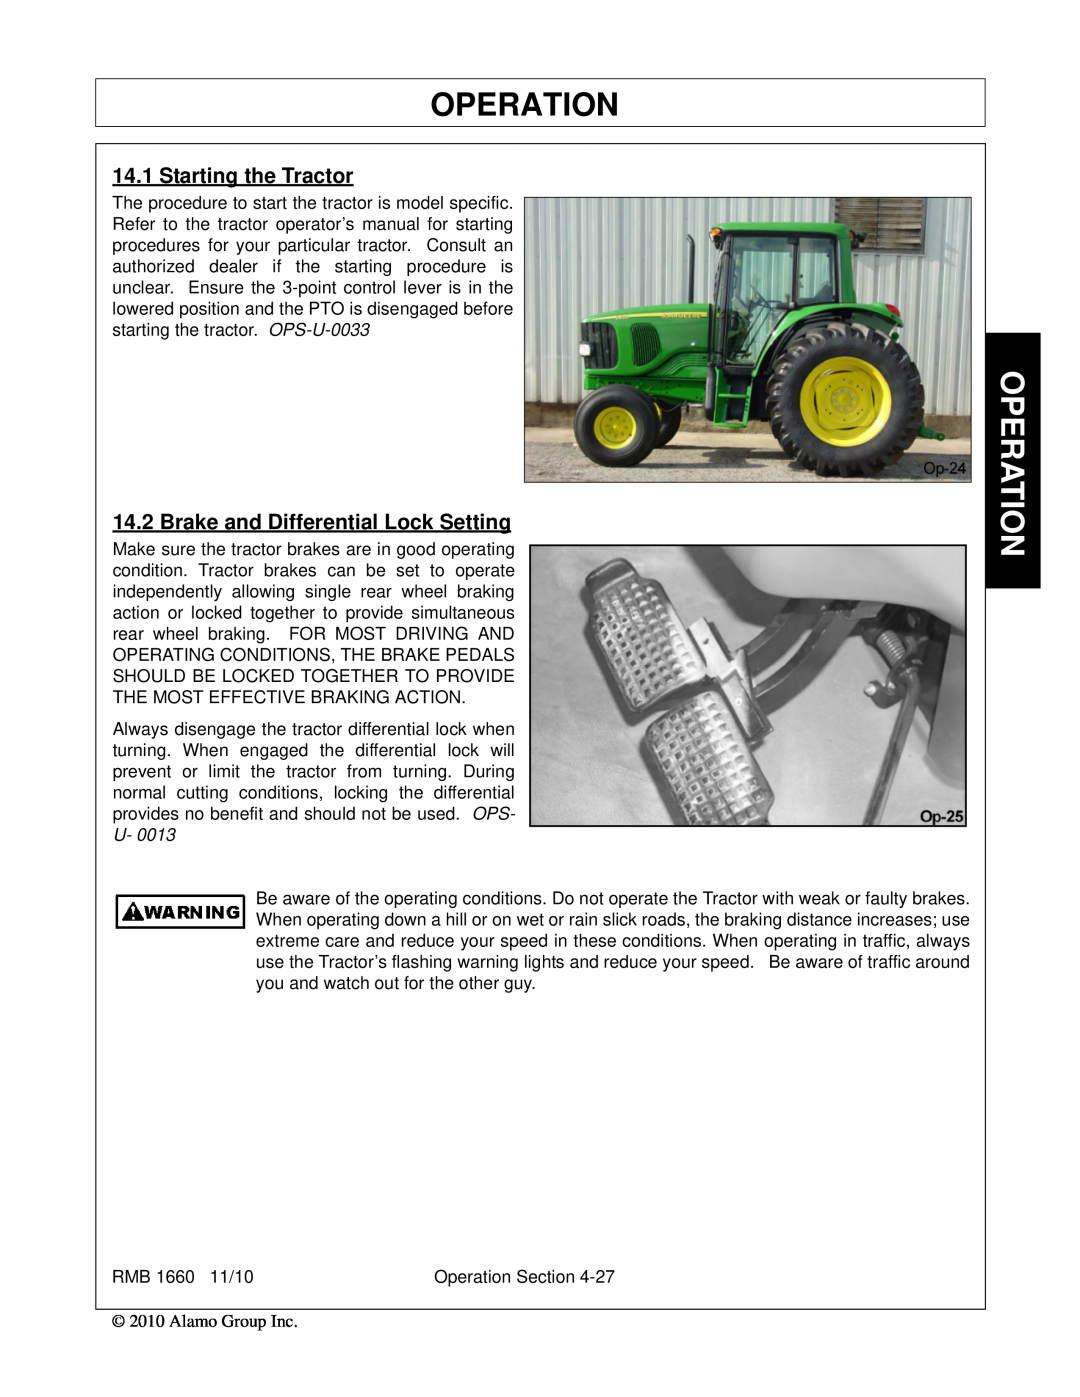 Bush Hog RMB 1660 manual Operation, Starting the Tractor, Brake and Differential Lock Setting 